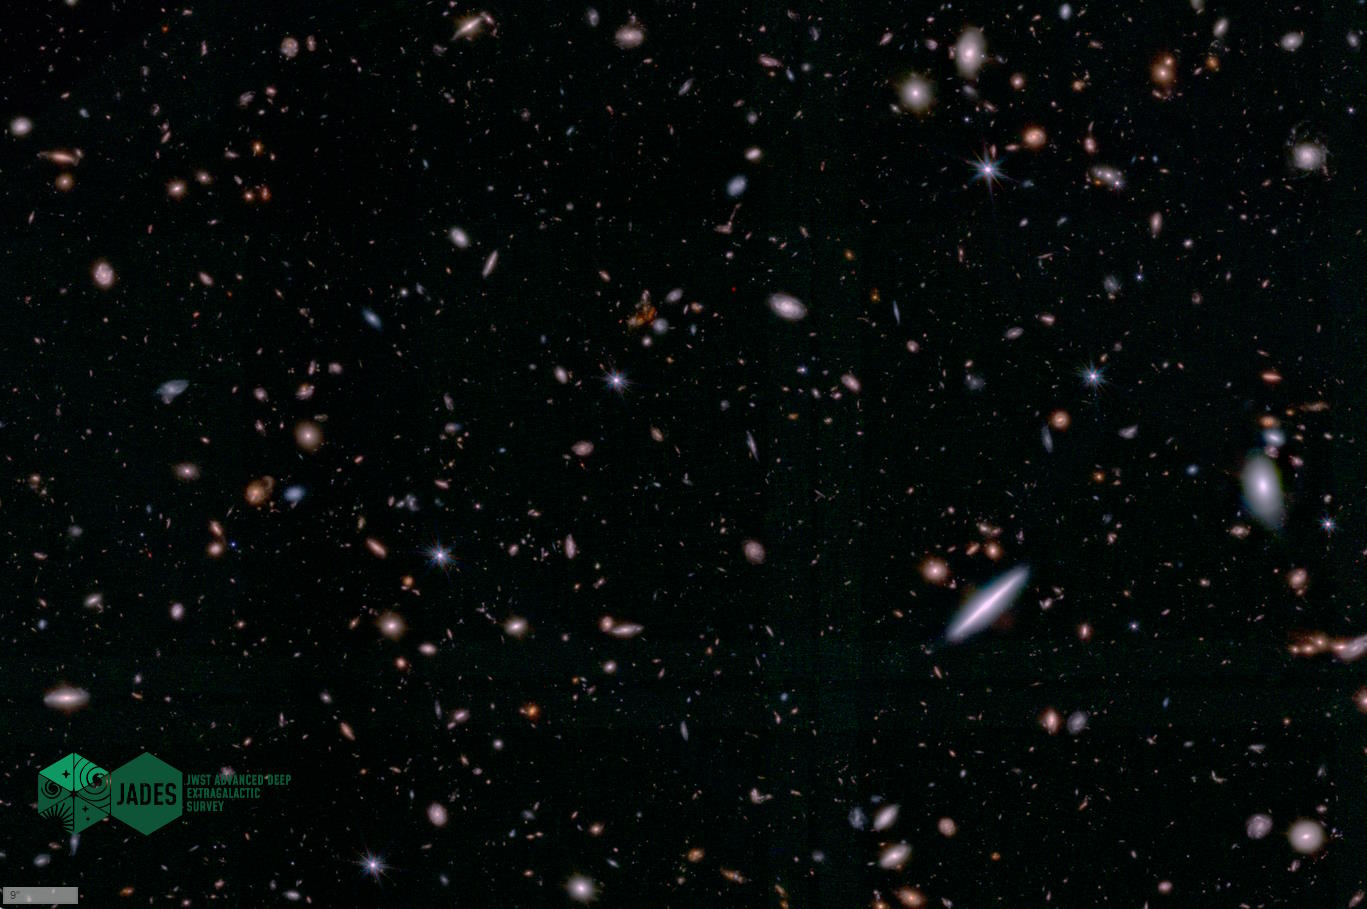 Nasa's deepest view of galaxies in the night sky using JWST.